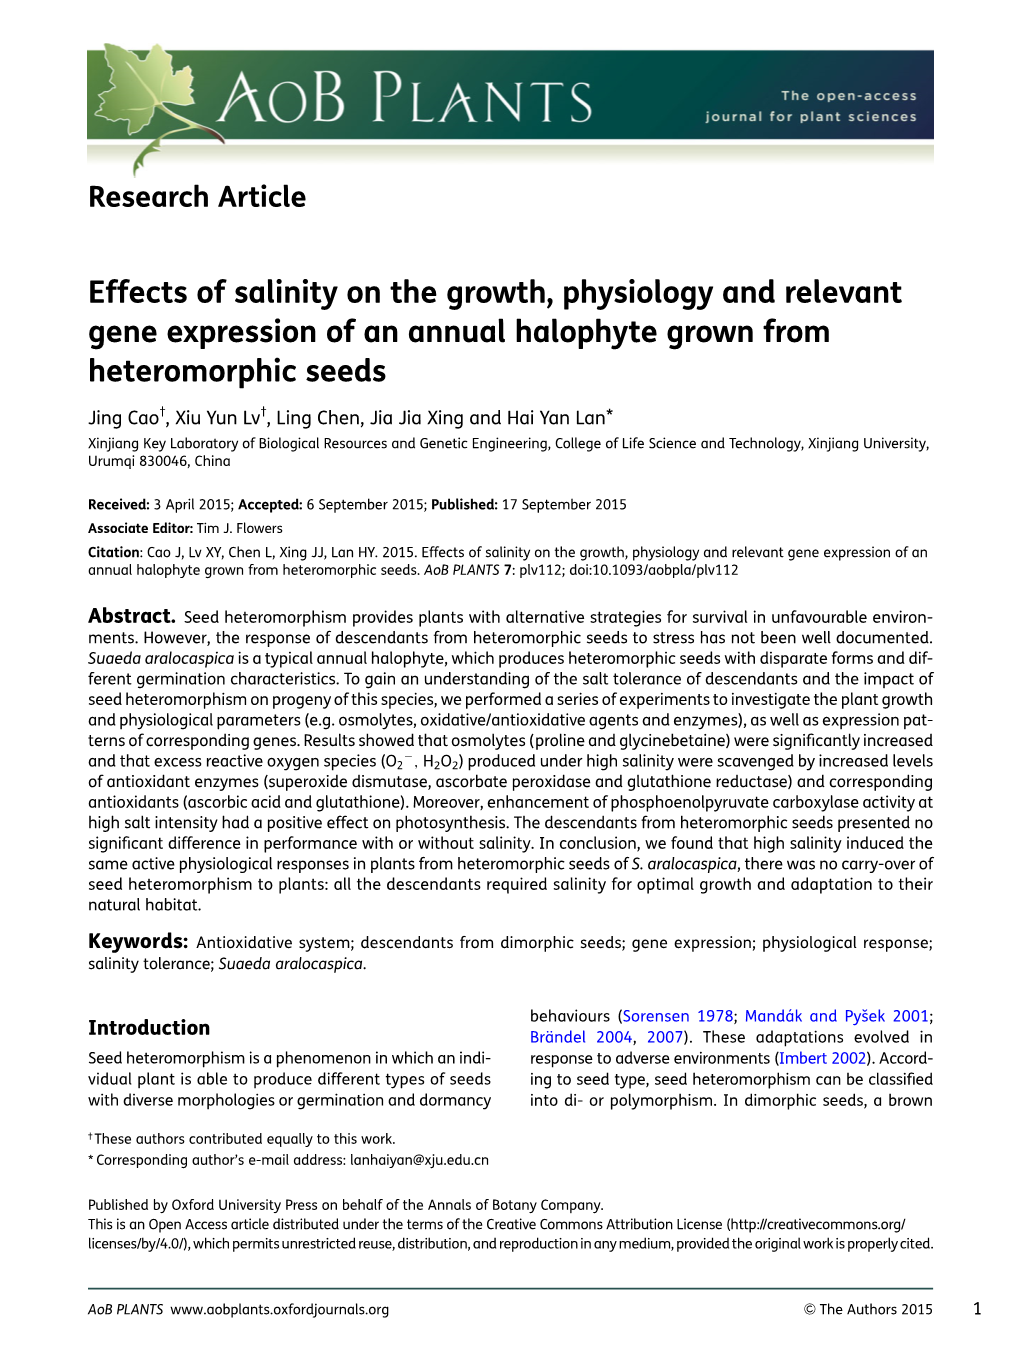 Effects of Salinity on the Growth, Physiology and Relevant Gene Expression of an Annual Halophyte Grown from Heteromorphic Seeds